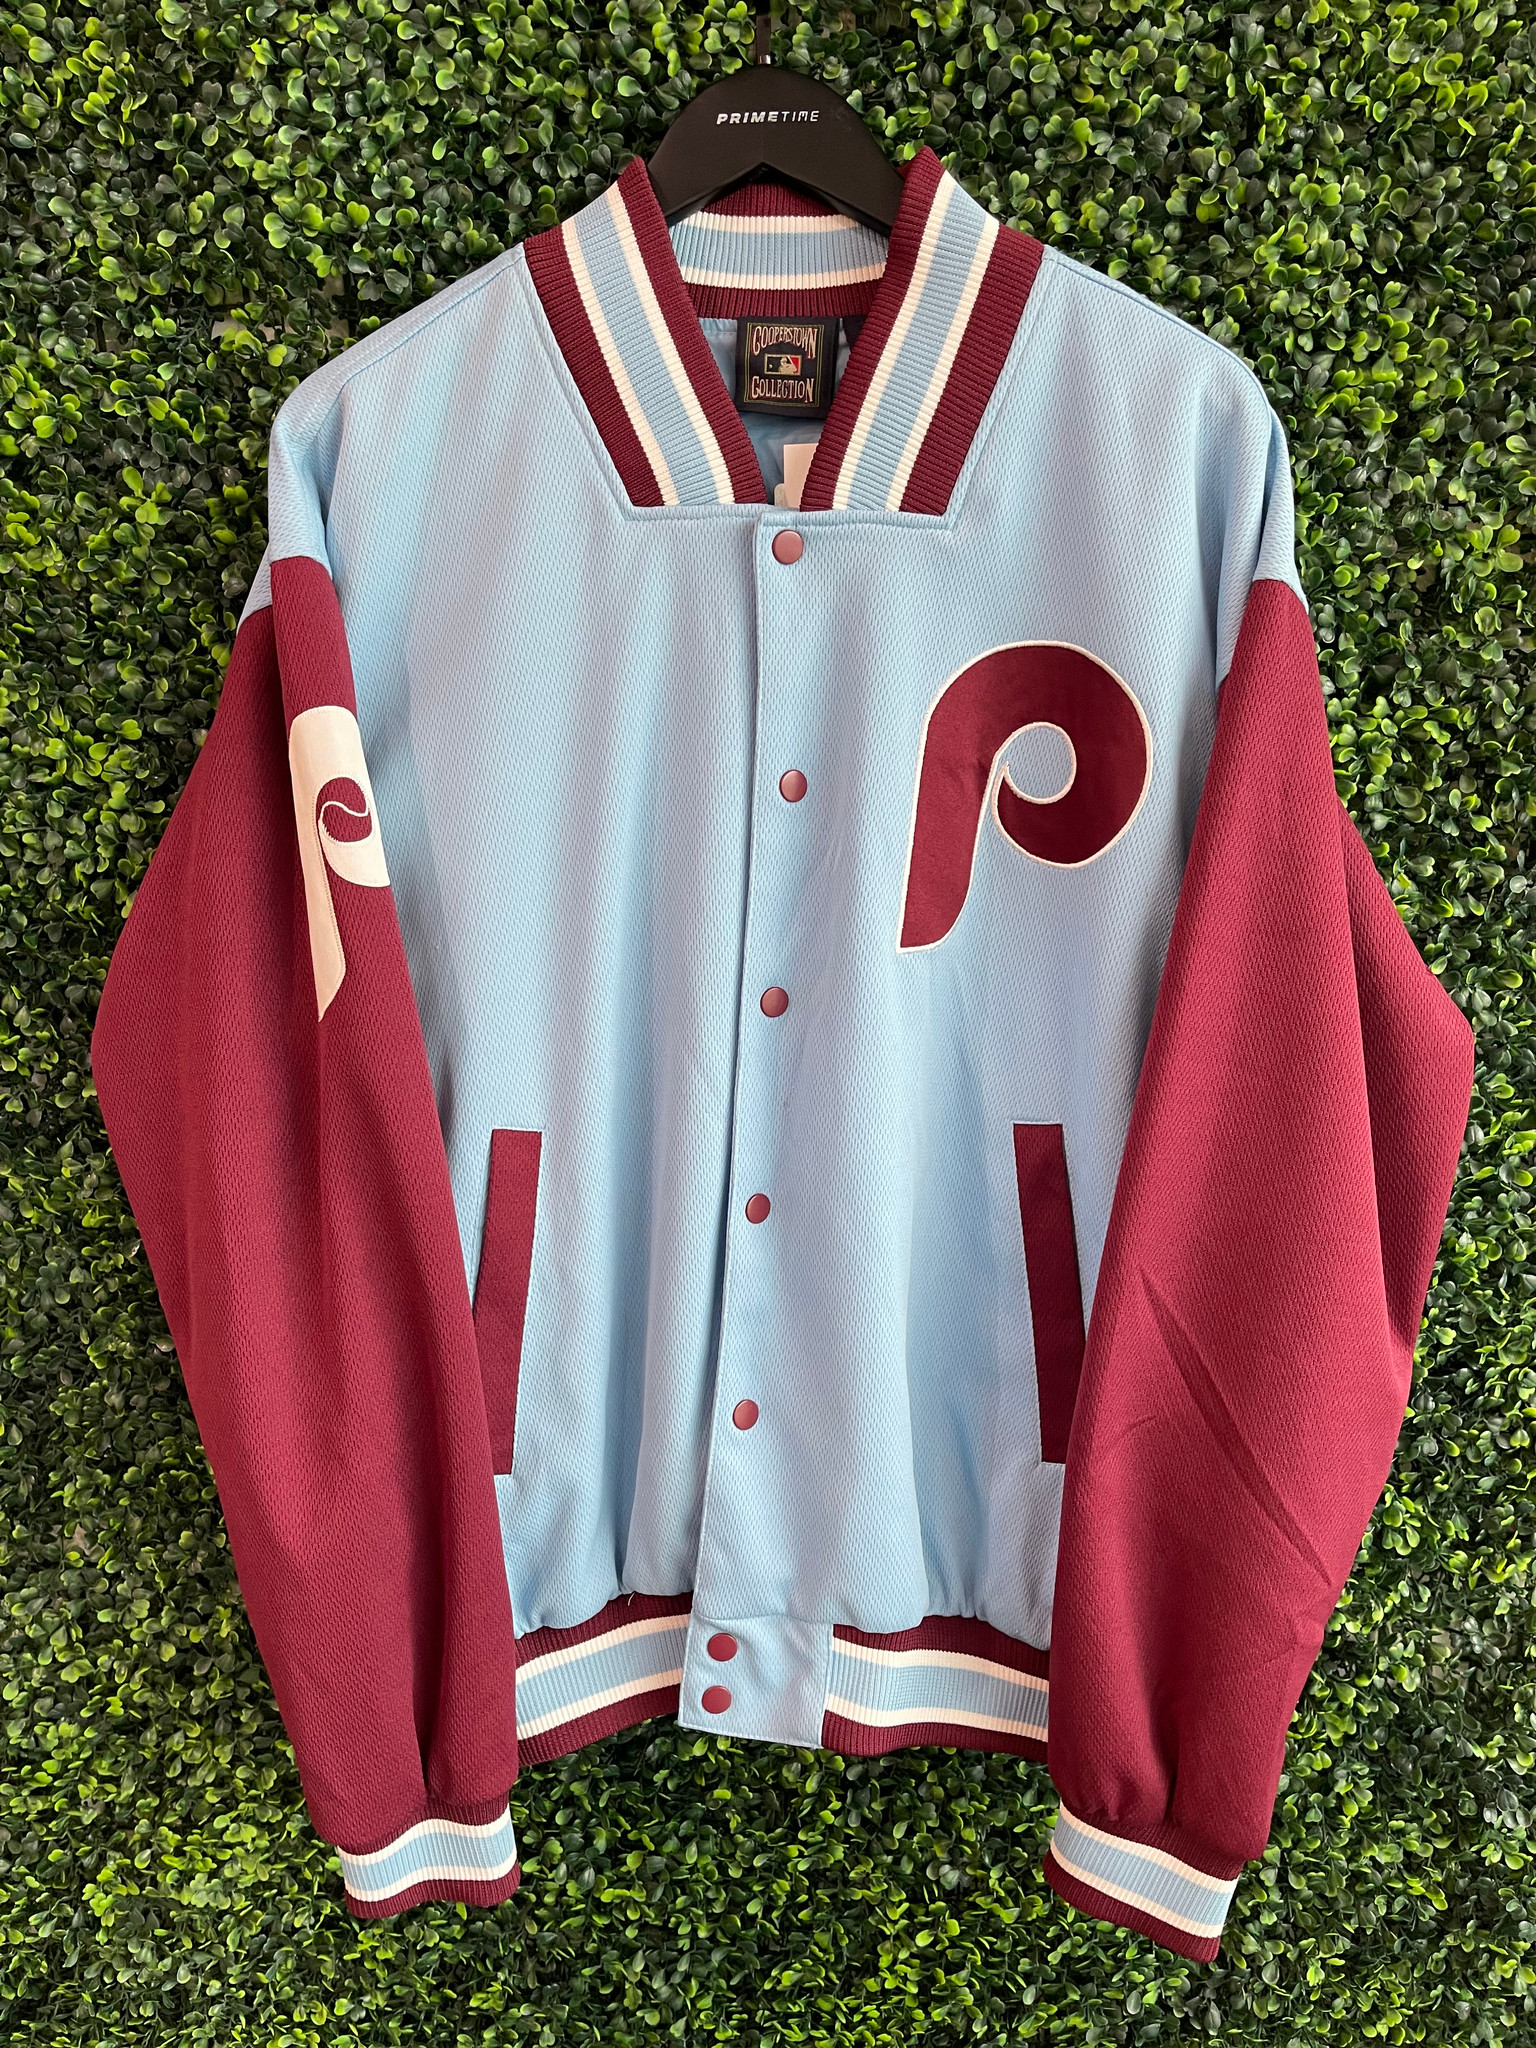 Official Philadelphia Phillies Cooperstown Collection Gear, Vintage Phillies  Jerseys, Hats, Shirts, Jackets